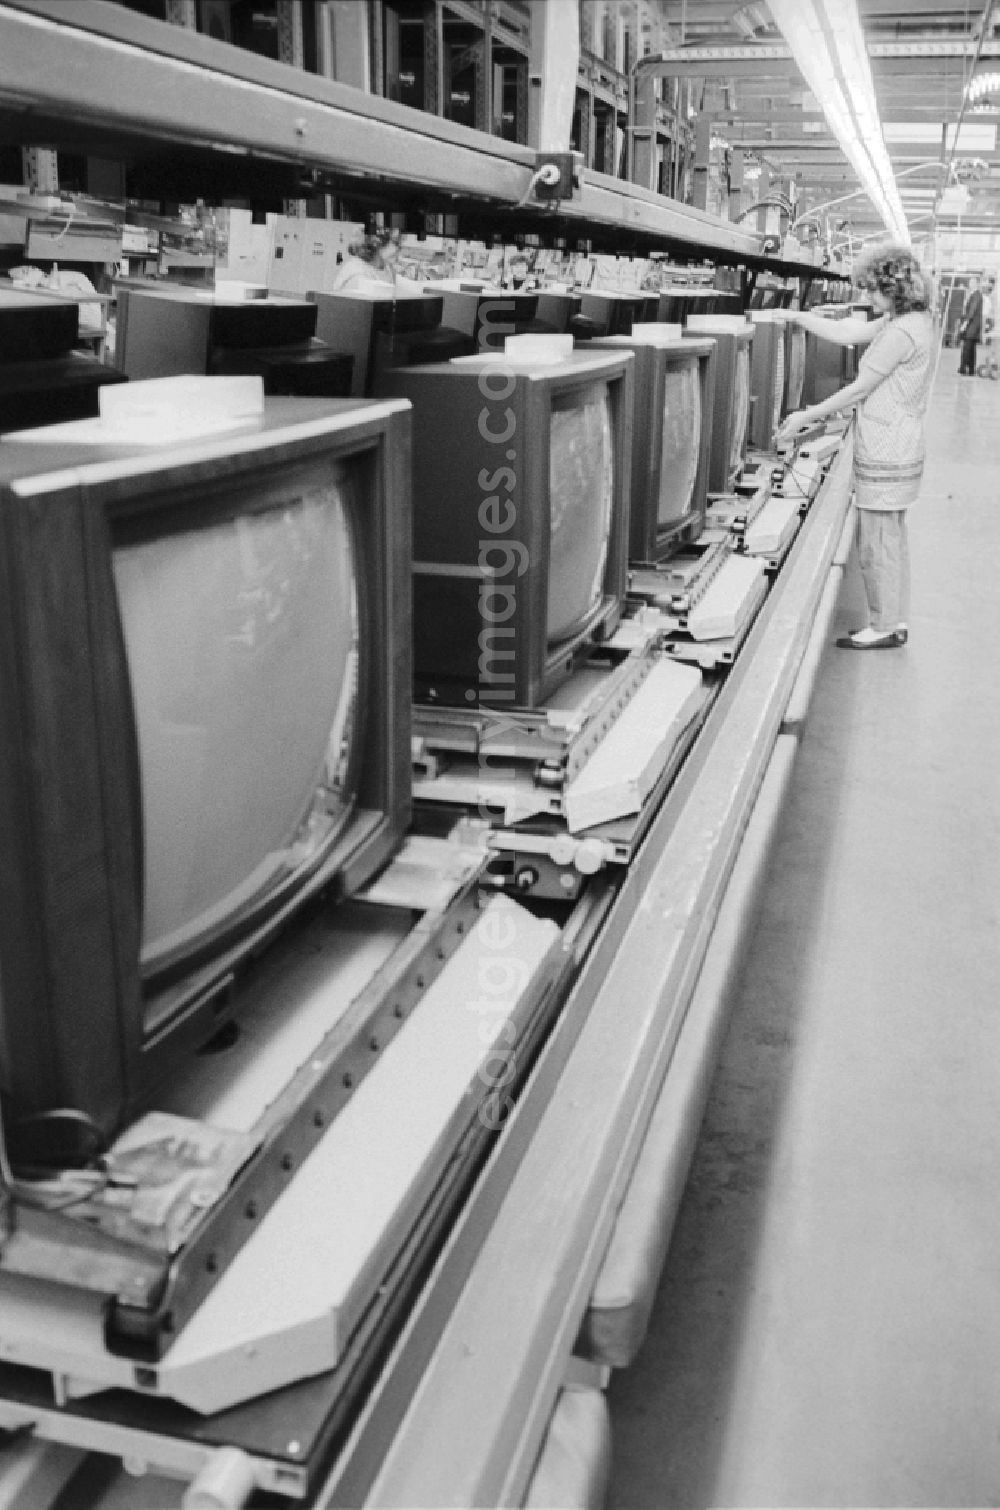 Staßfurt: Technical installations and production equipment on the conveyor belt of RFT - television equipment production in Stassfurt in the federal state of Saxony-Anhalt on the territory of the former GDR, German Democratic Republic